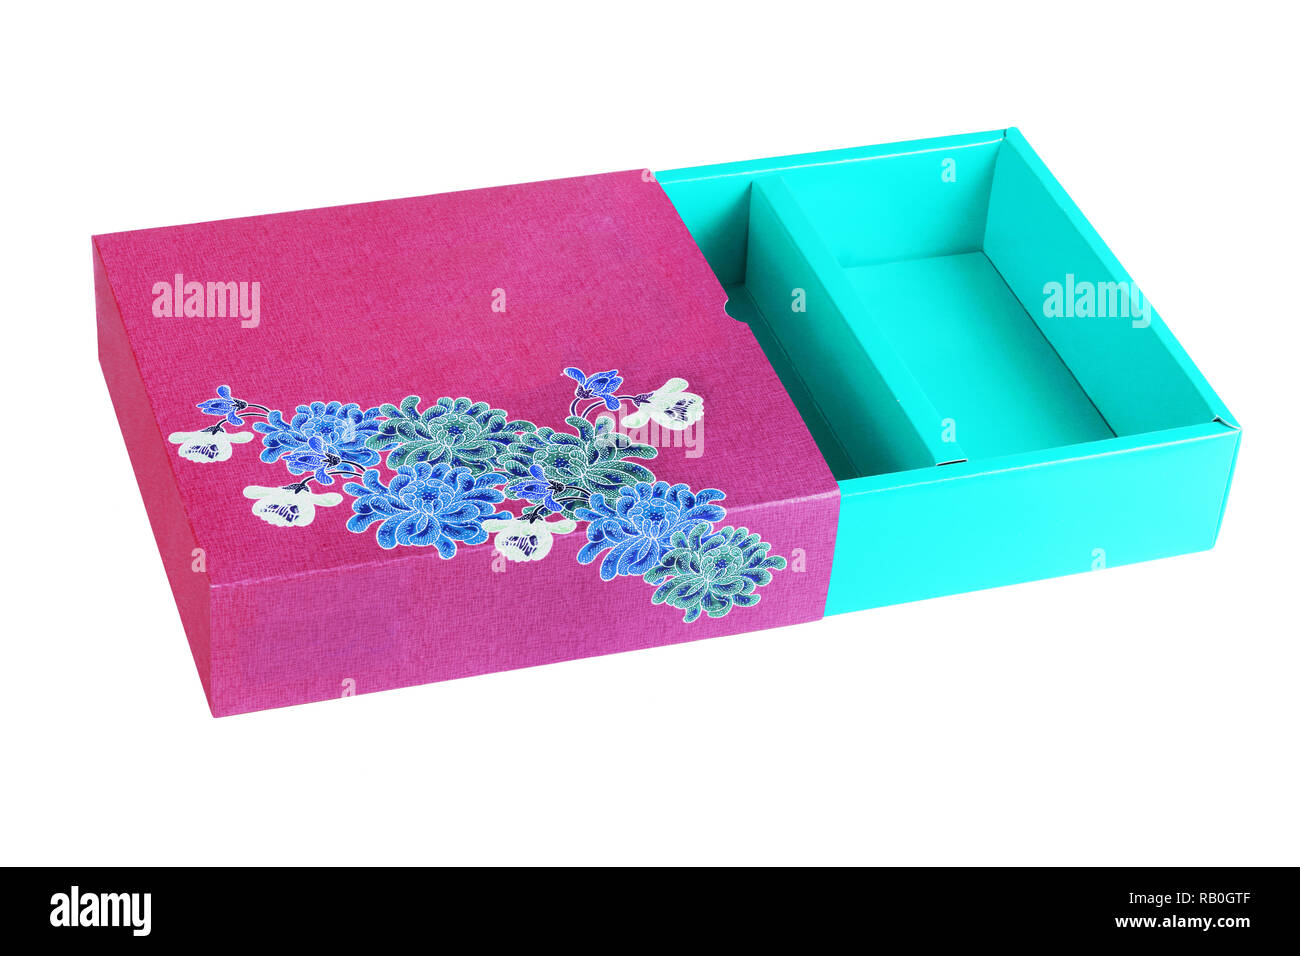 Chinese Floral Gift Box on White Background Stock Photo